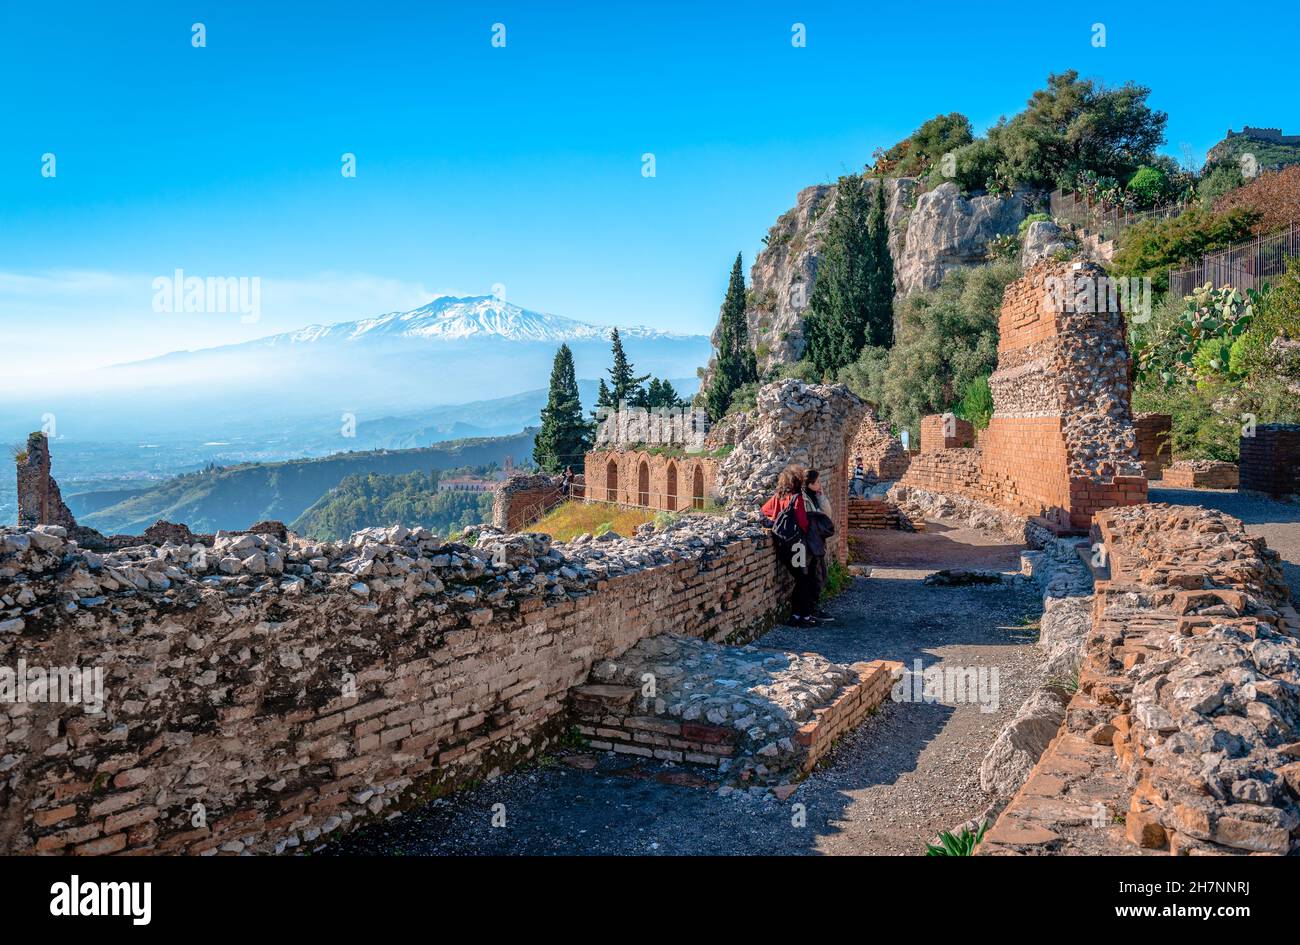 Via Teatro Greko, the ancient alley that leads to the Ancient Greek Theatre. The smoking foggy Mount Etna is in the background. Sicily, Italy. Stock Photo